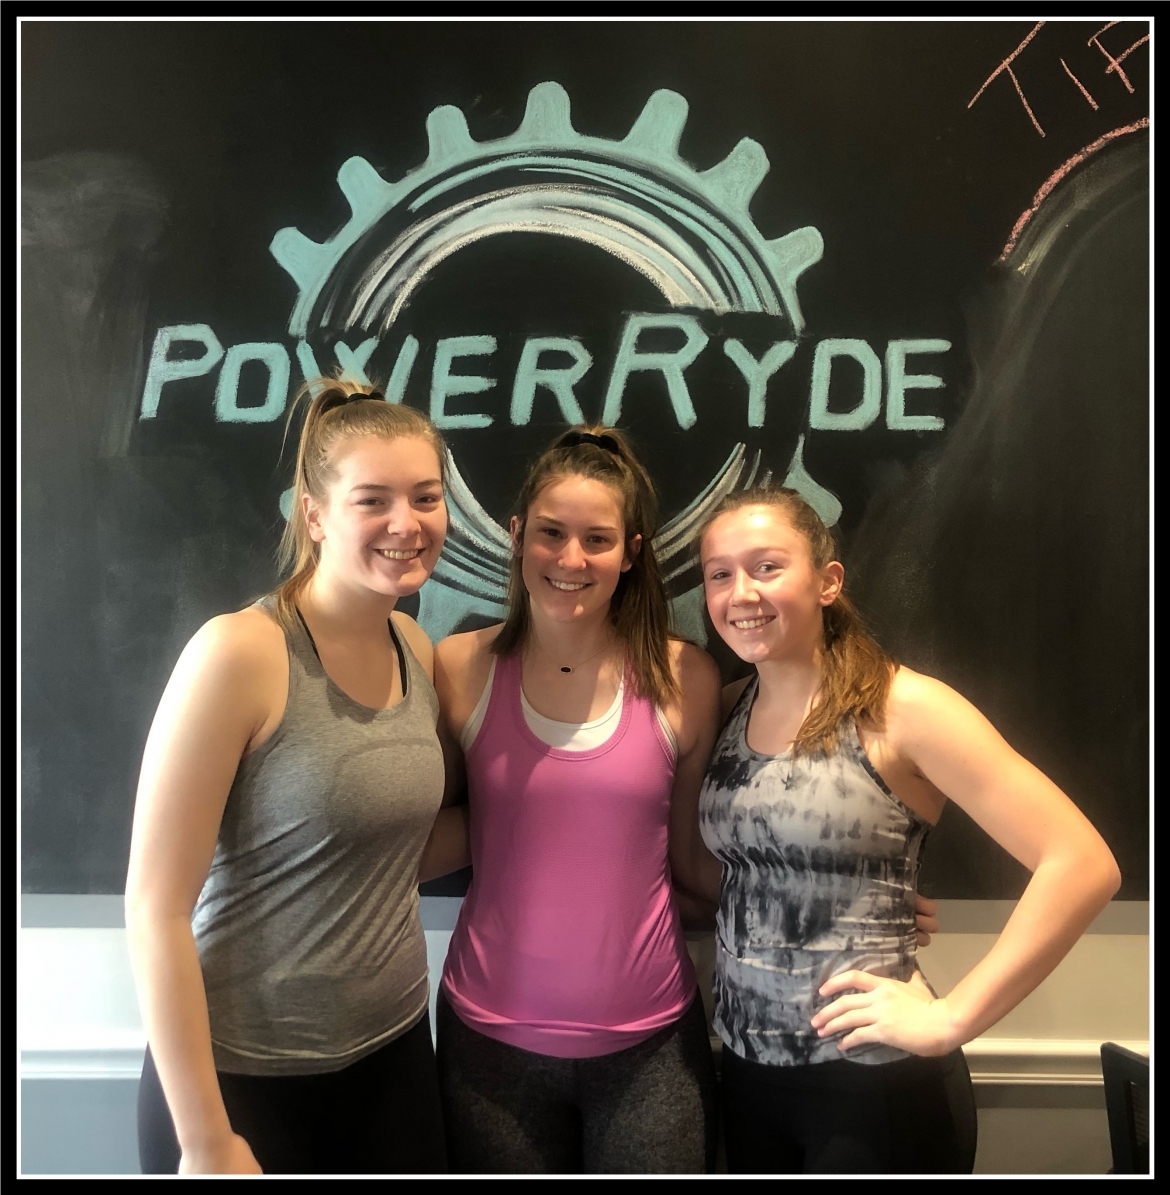 Abby Nehlen, Carlie Duesing, and Kylie Clifton in front of PoerRyde chalkboard